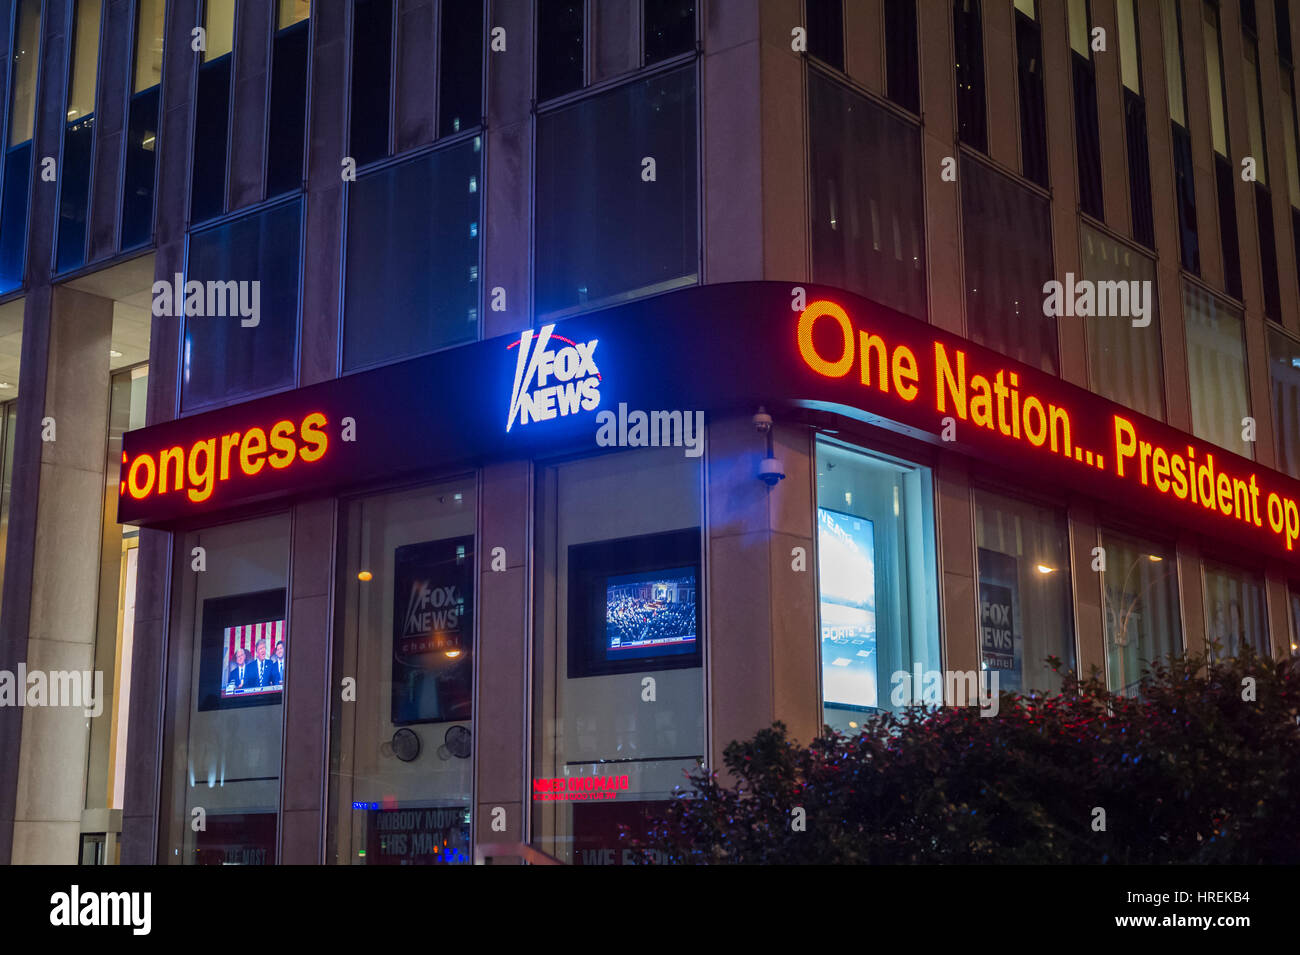 The News Corp. building in Midtown Manhattan in New York shows the Fox News broadcast below their news ticker of President Donald Trump's speech to a joint session of Congress on Tuesday, February 28, 2017.  (© Richard B. Levine) Stock Photo